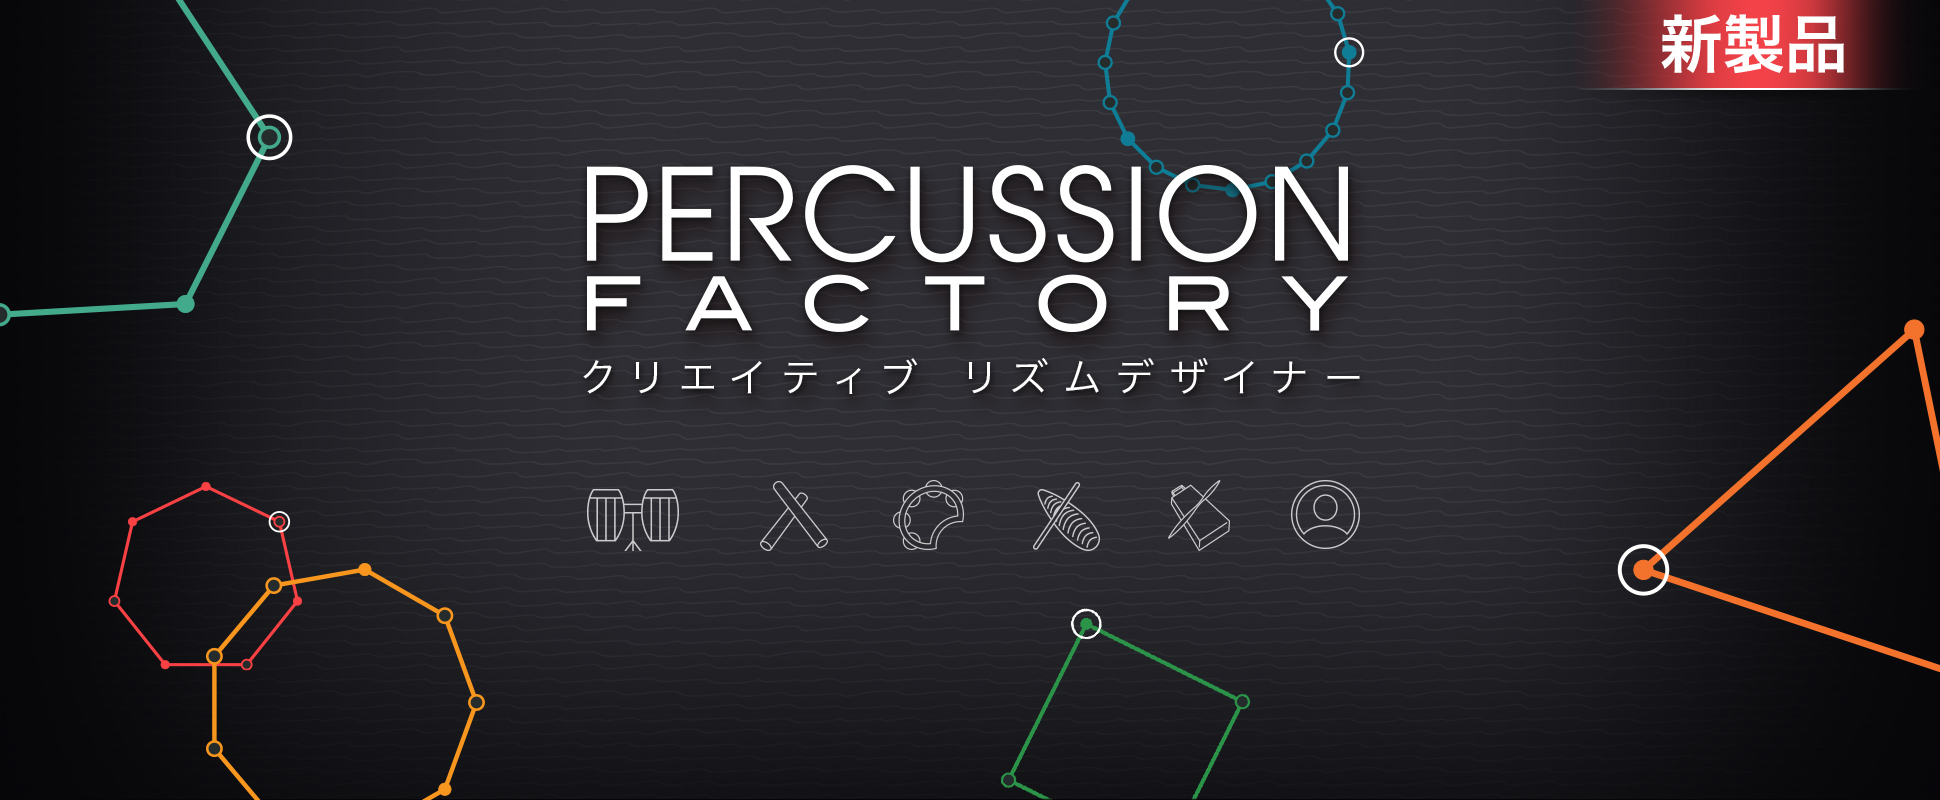 Percussion Factory - New